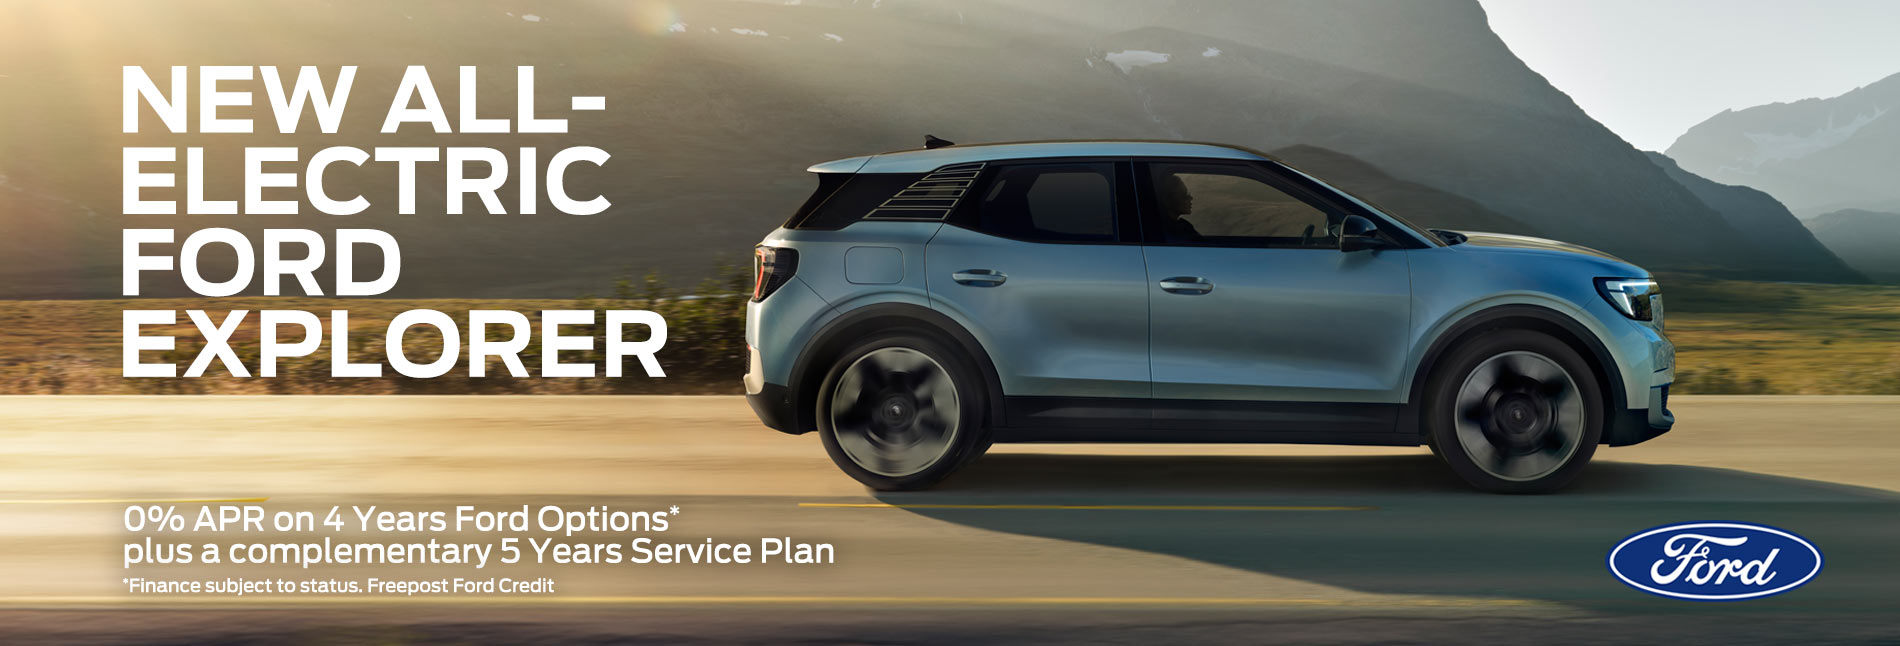 New All-Electric Ford Explorer - Available to order